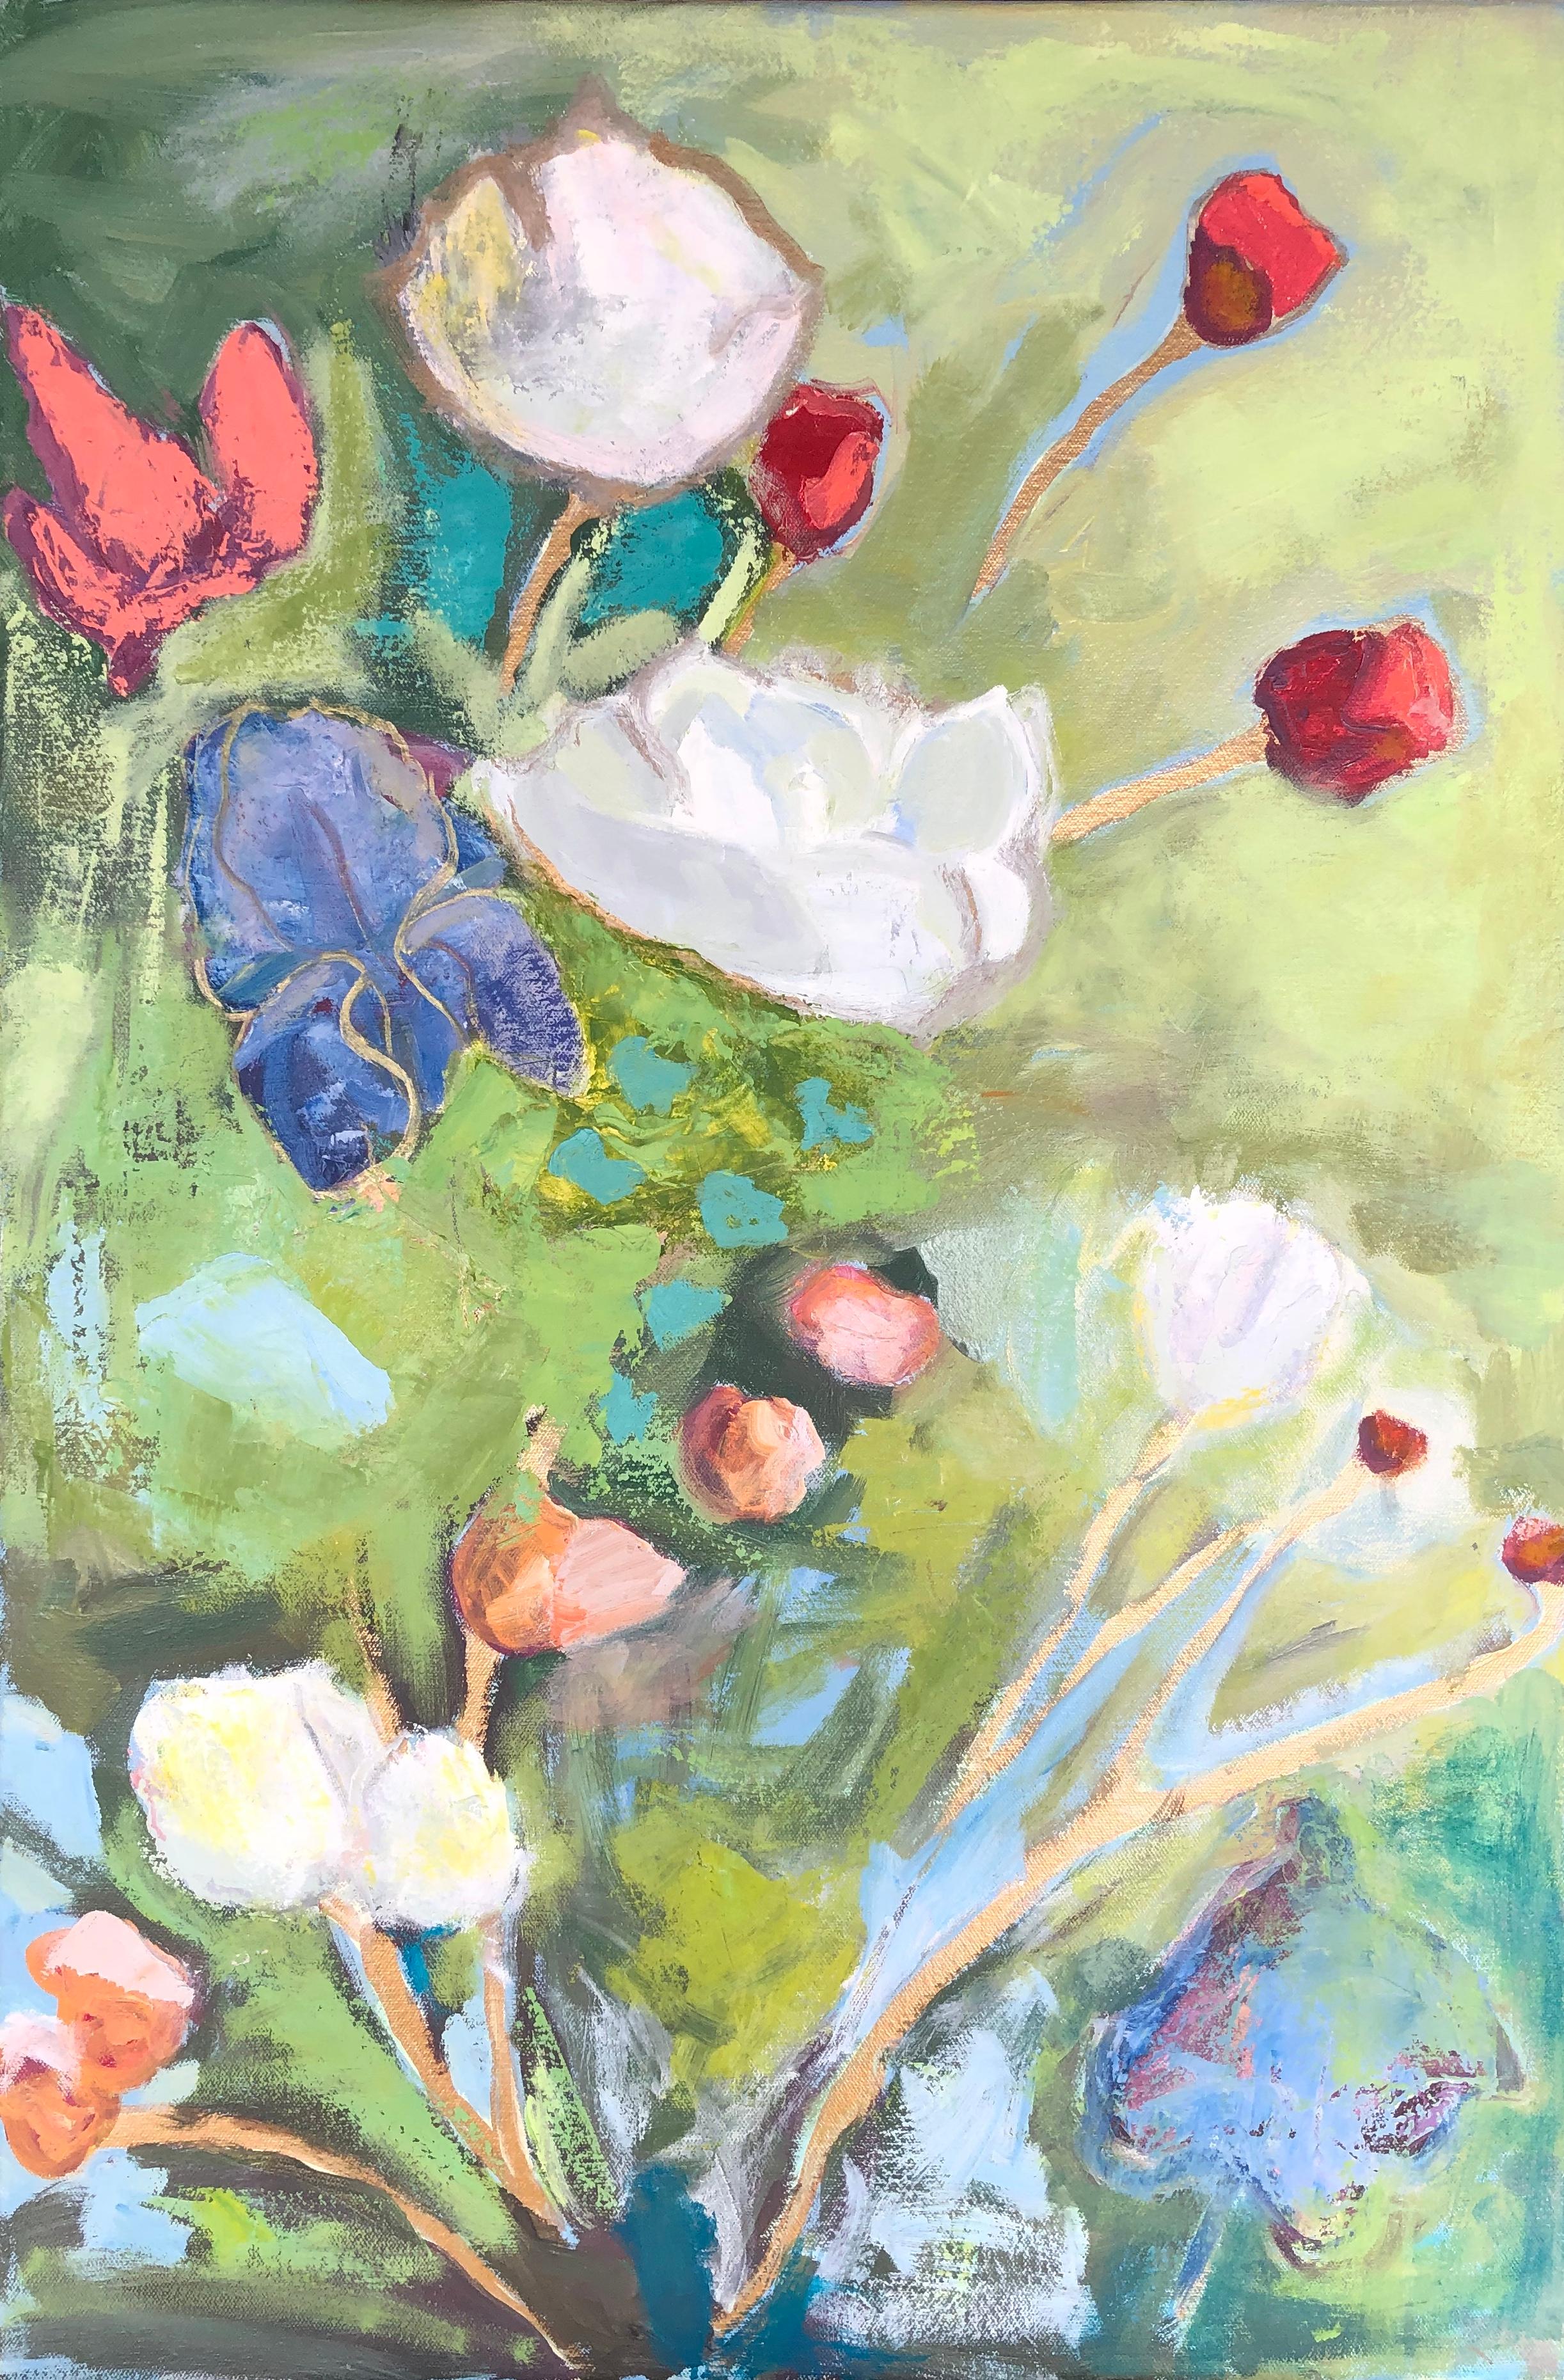 Anne Harney Still-Life Painting - "Into the Garden" impressionist style still life oil painting with green, white